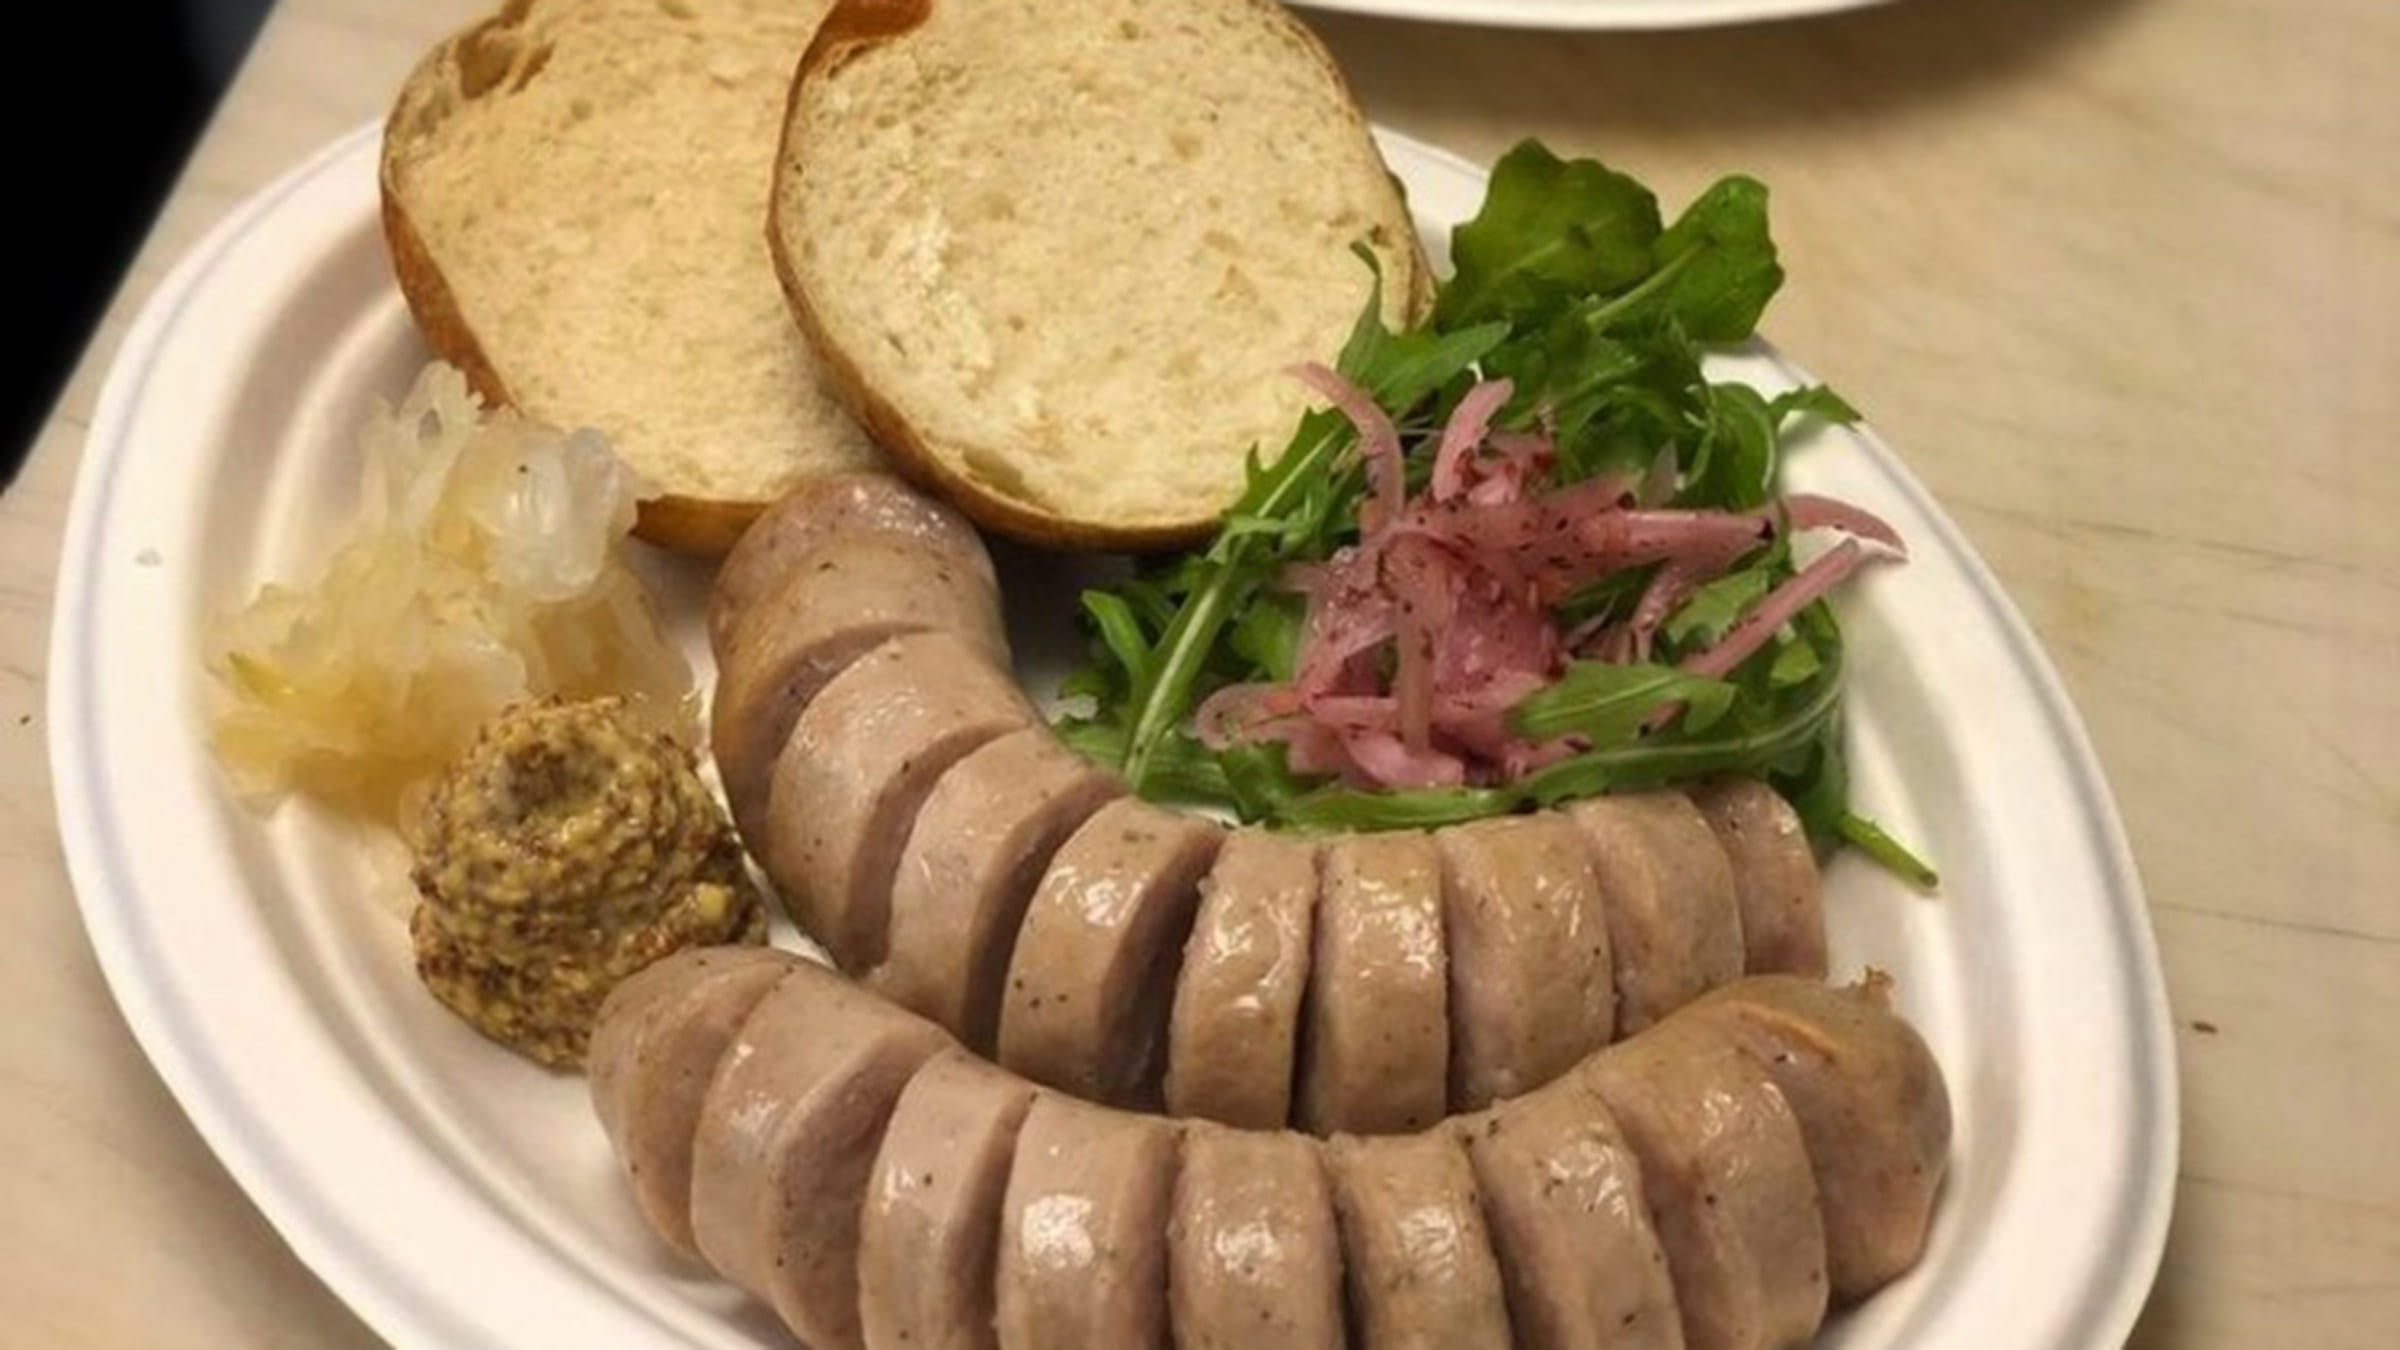 A sausage dish served for lunch at Mogrog Cafe